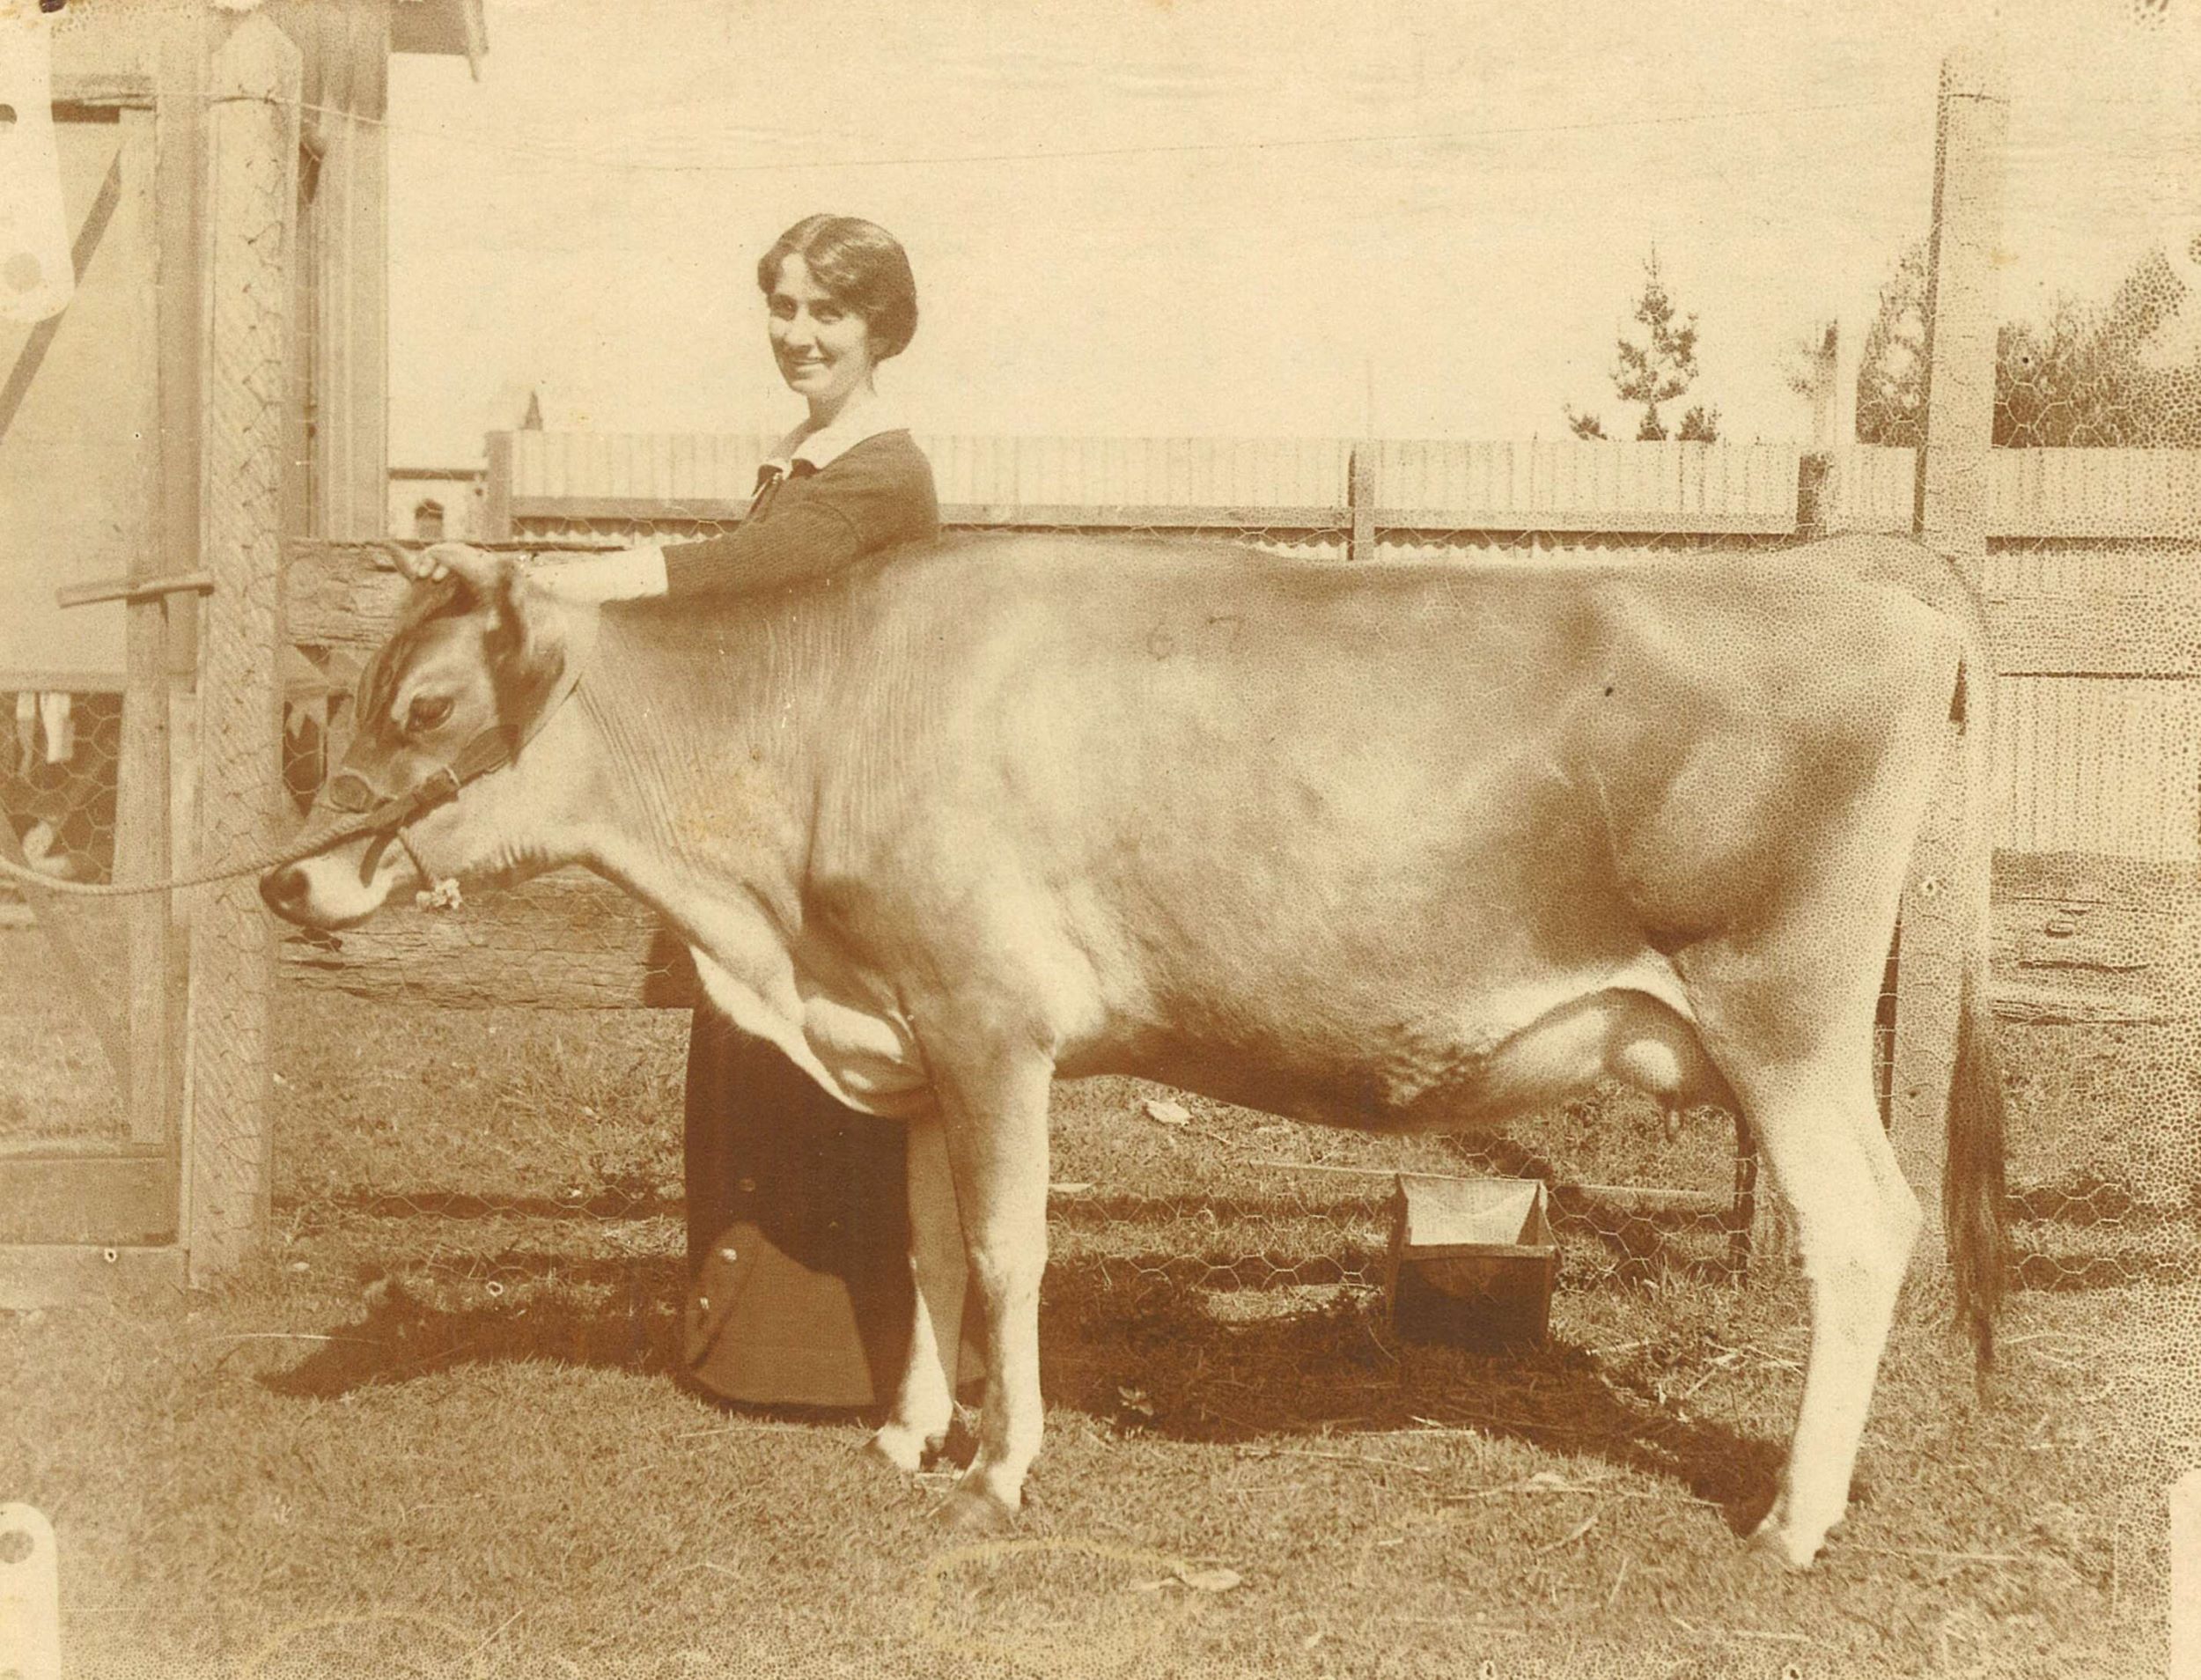 Woman stands beside a cow that is tied to a farm fence post